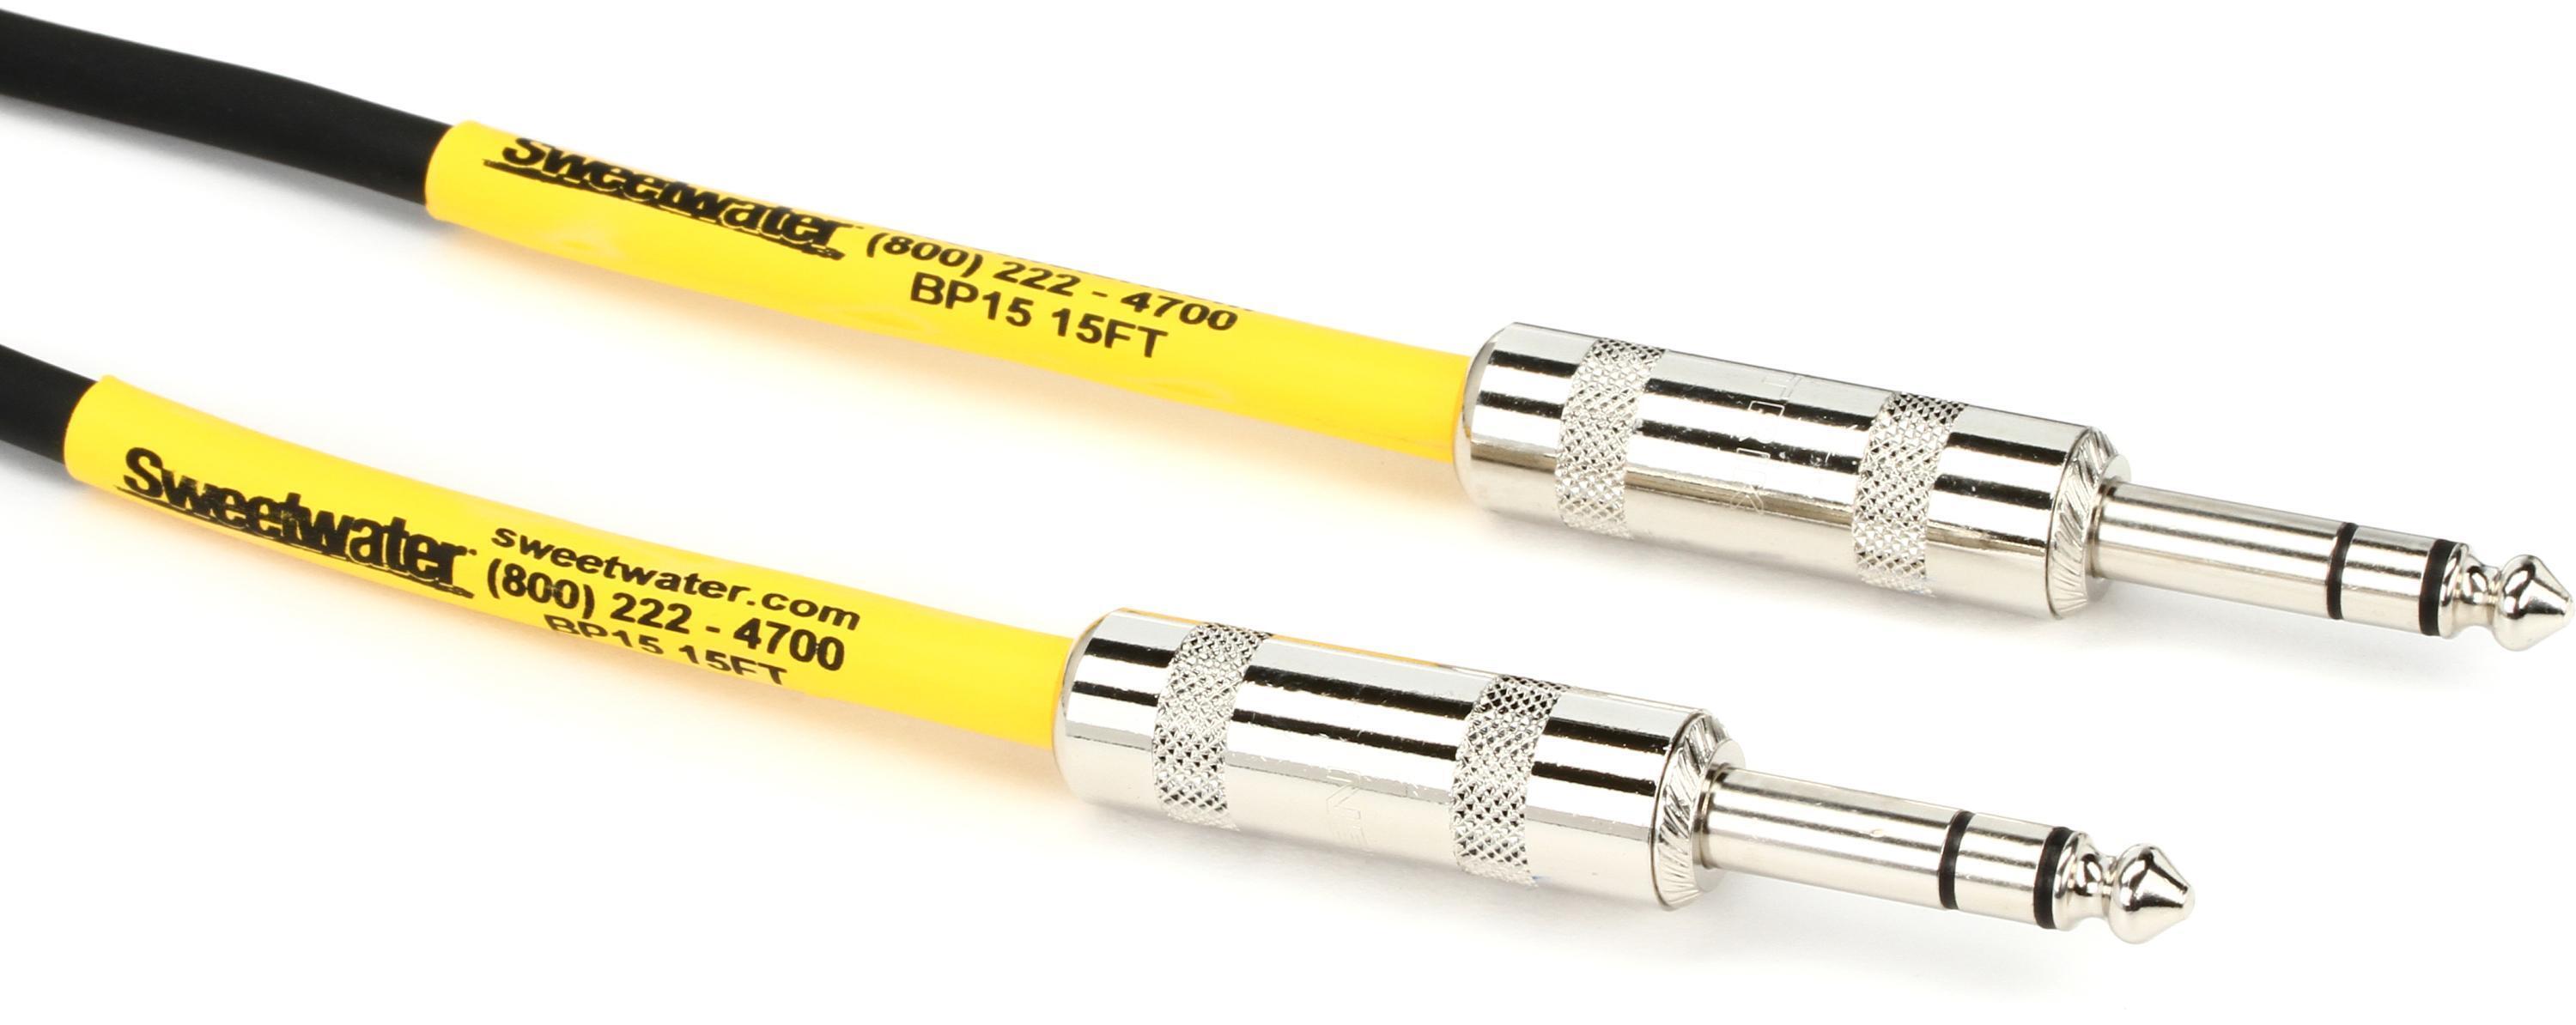 Bundled Item: Pro Co BP-15 Excellines Balanced Patch Cable - 1/4-inch TRS Male to 1/4-inch TRS Male - 15 foot